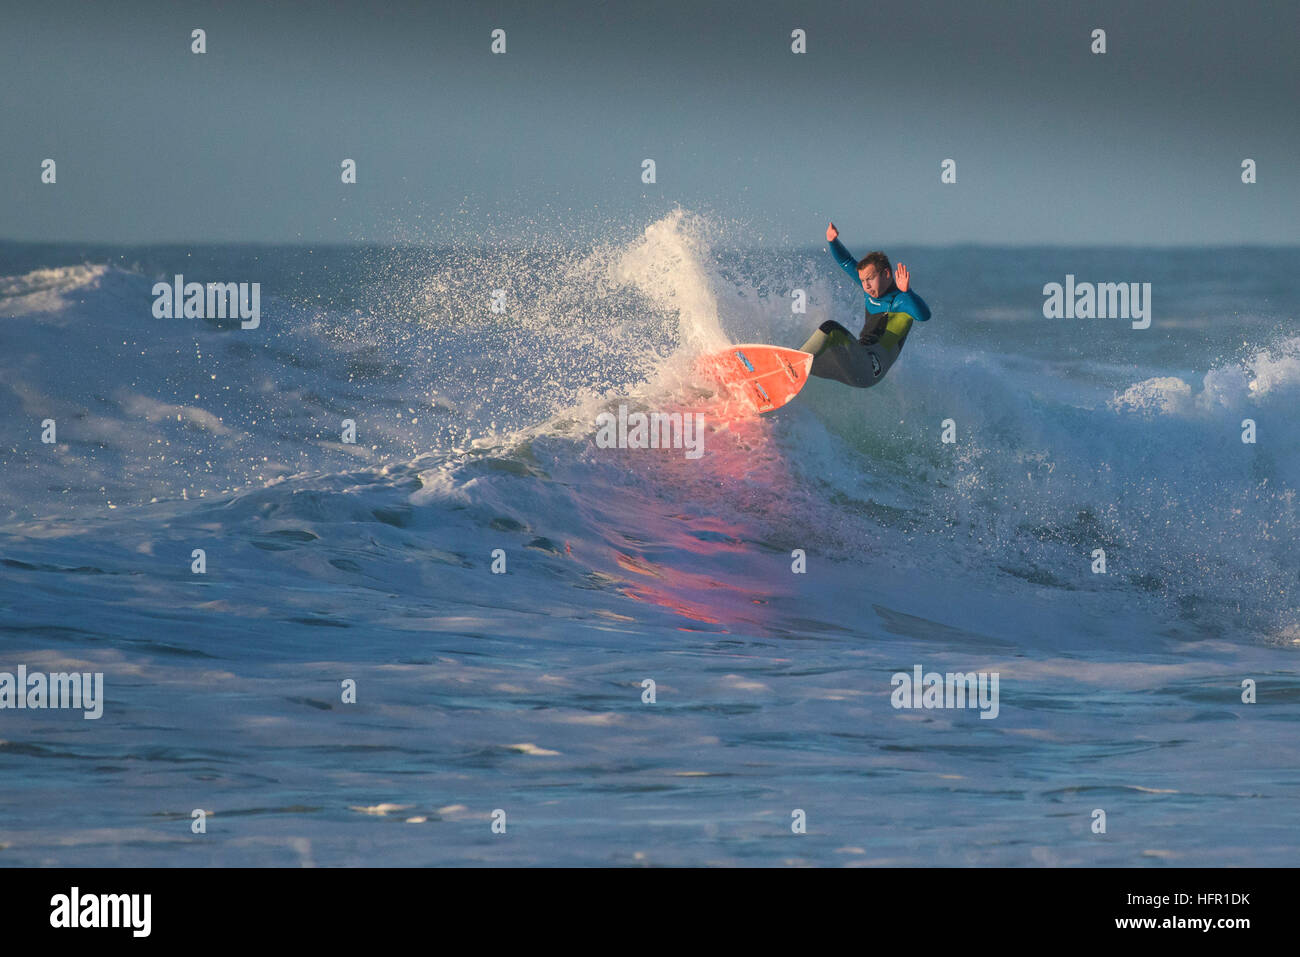 Exhilarating surfing action action at Fistral in Newquay, Cornwall, England. UK. Stock Photo